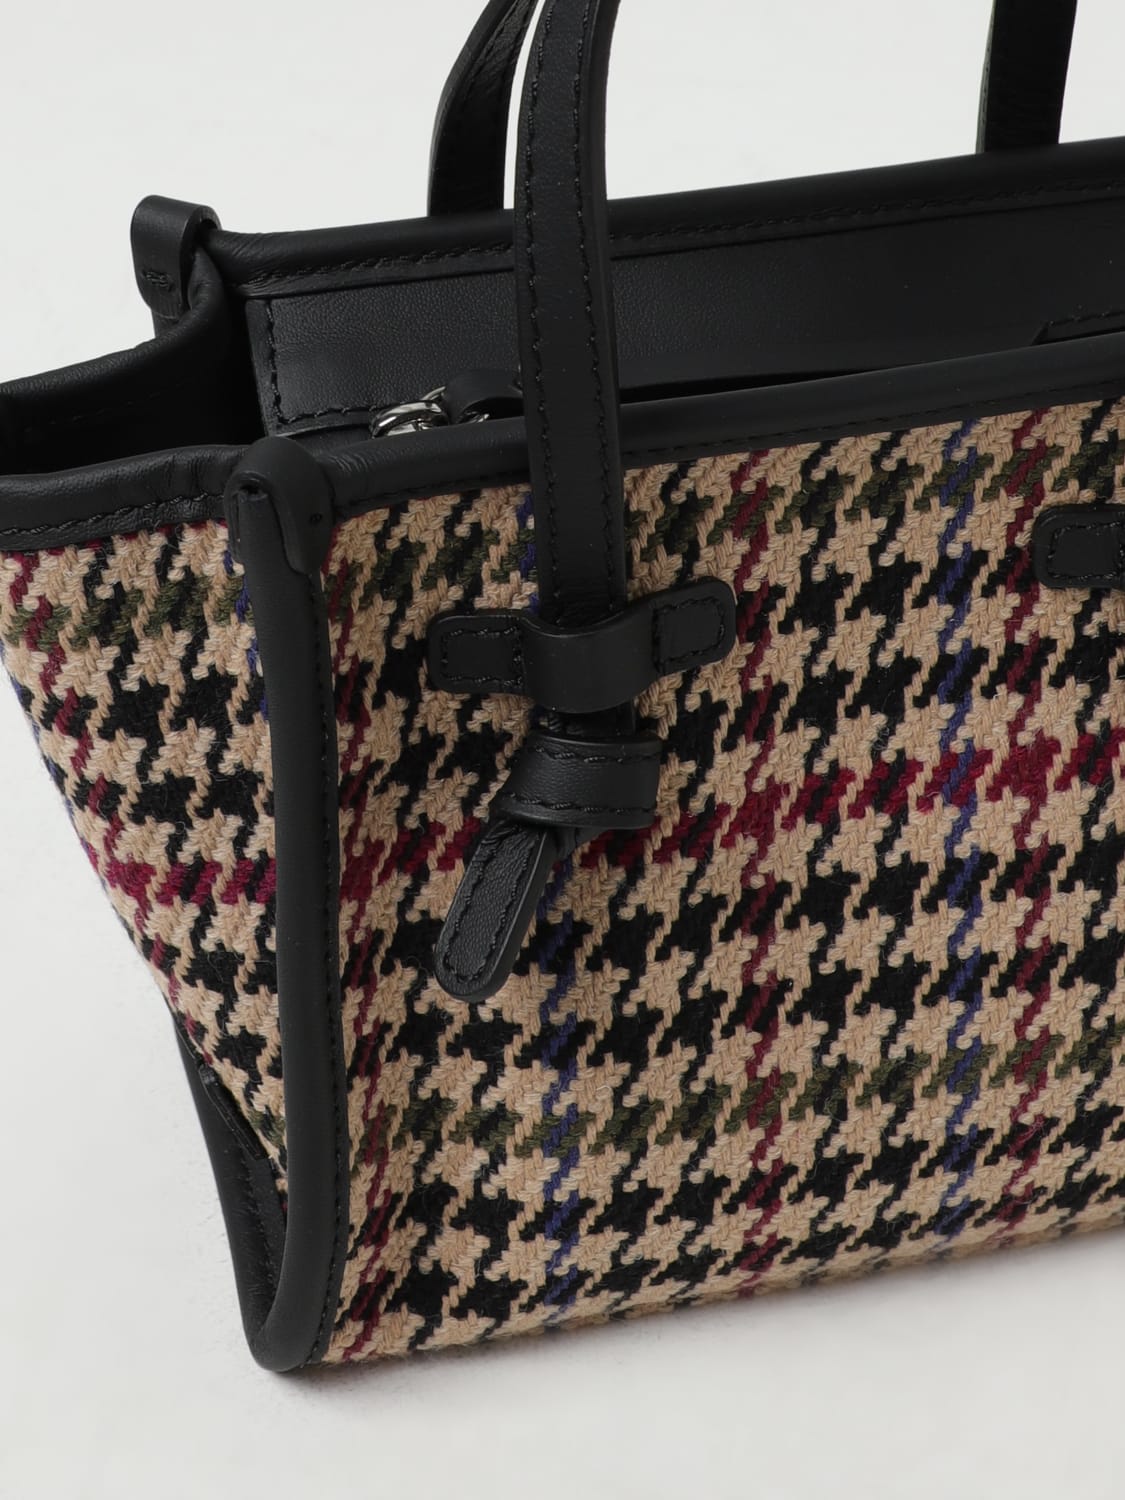 Burberry Teams With Vestiaire on Outerwear, Handbag Exchange